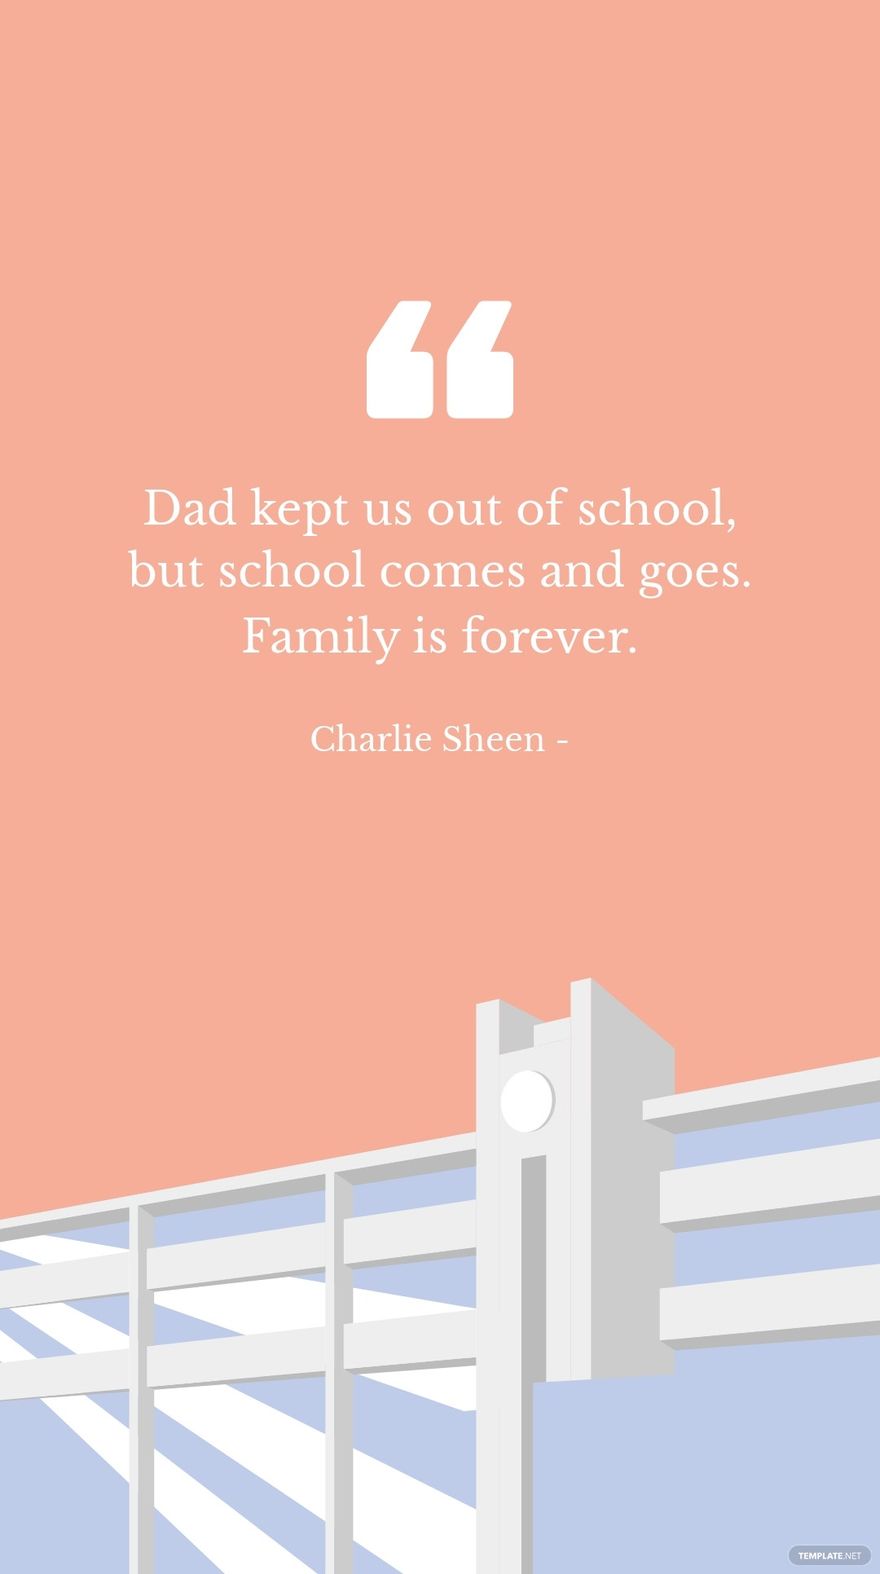 Free Charlie Sheen - Dad kept us out of school, but school comes and goes. Family is forever.